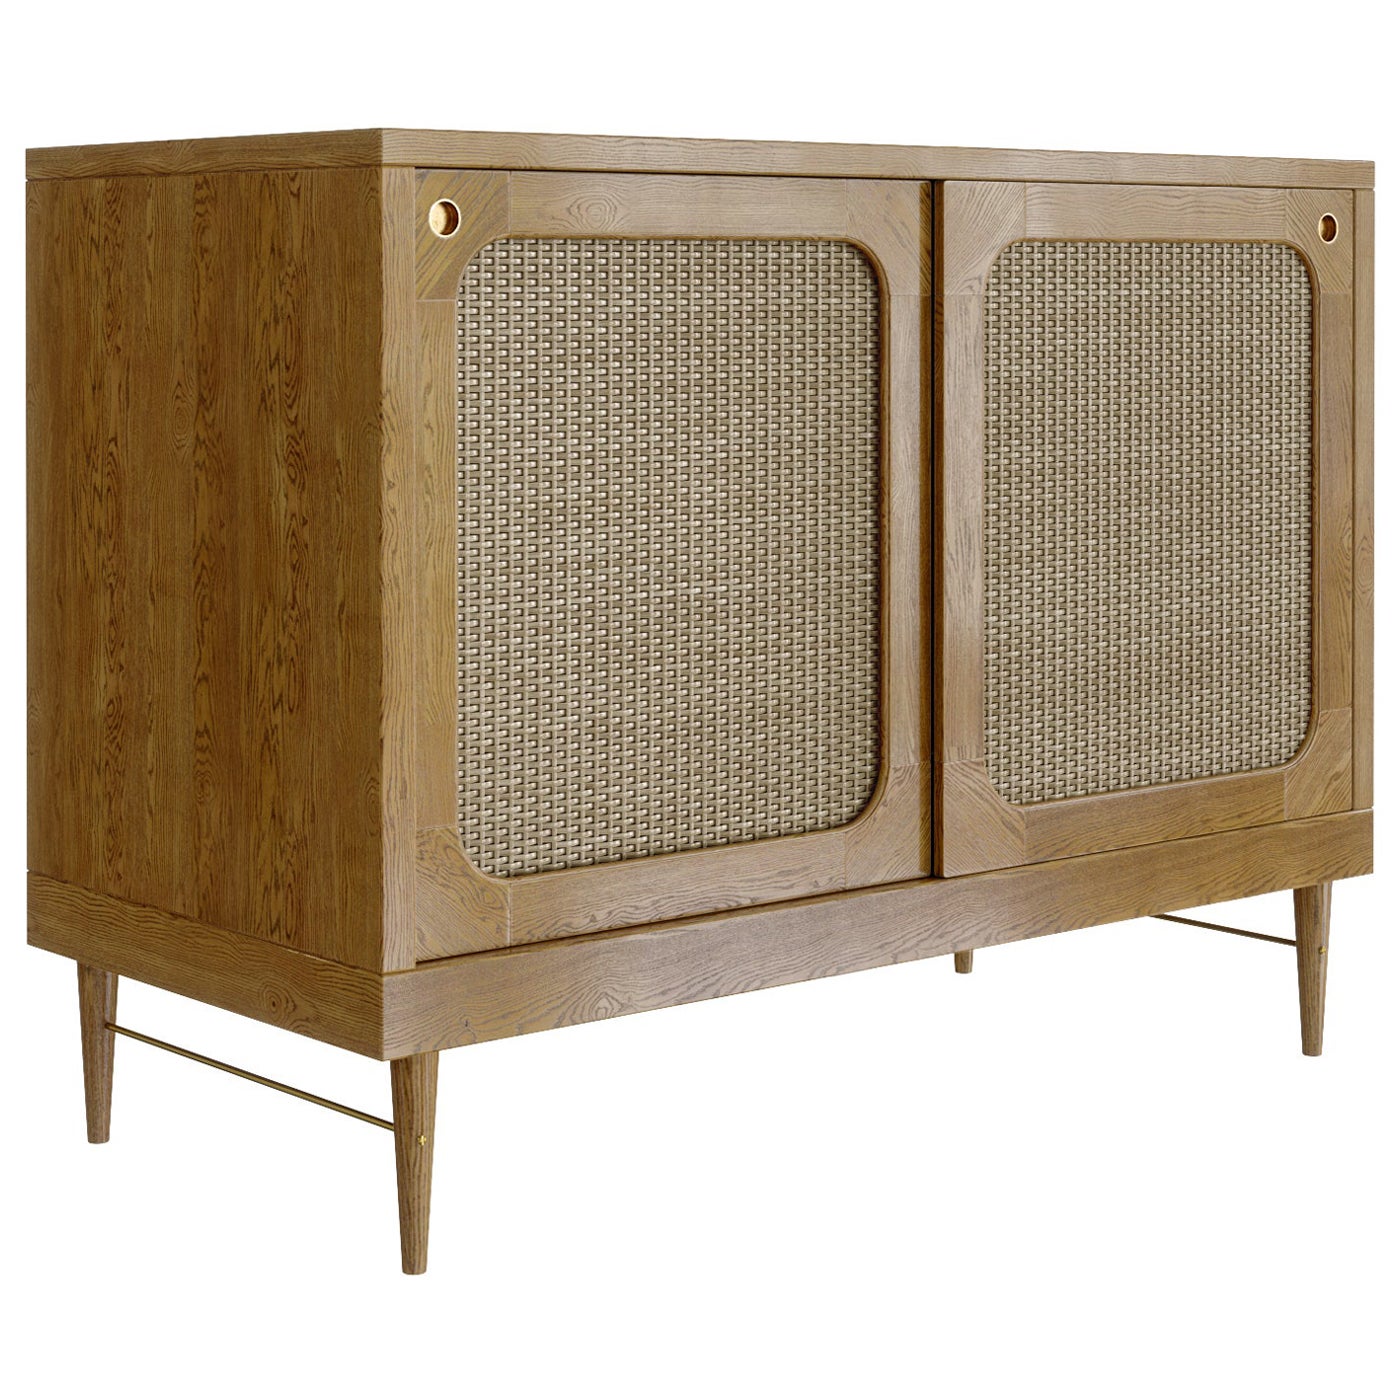 Sanders Sideboard in Natural Oak and Rattan — Small For Sale